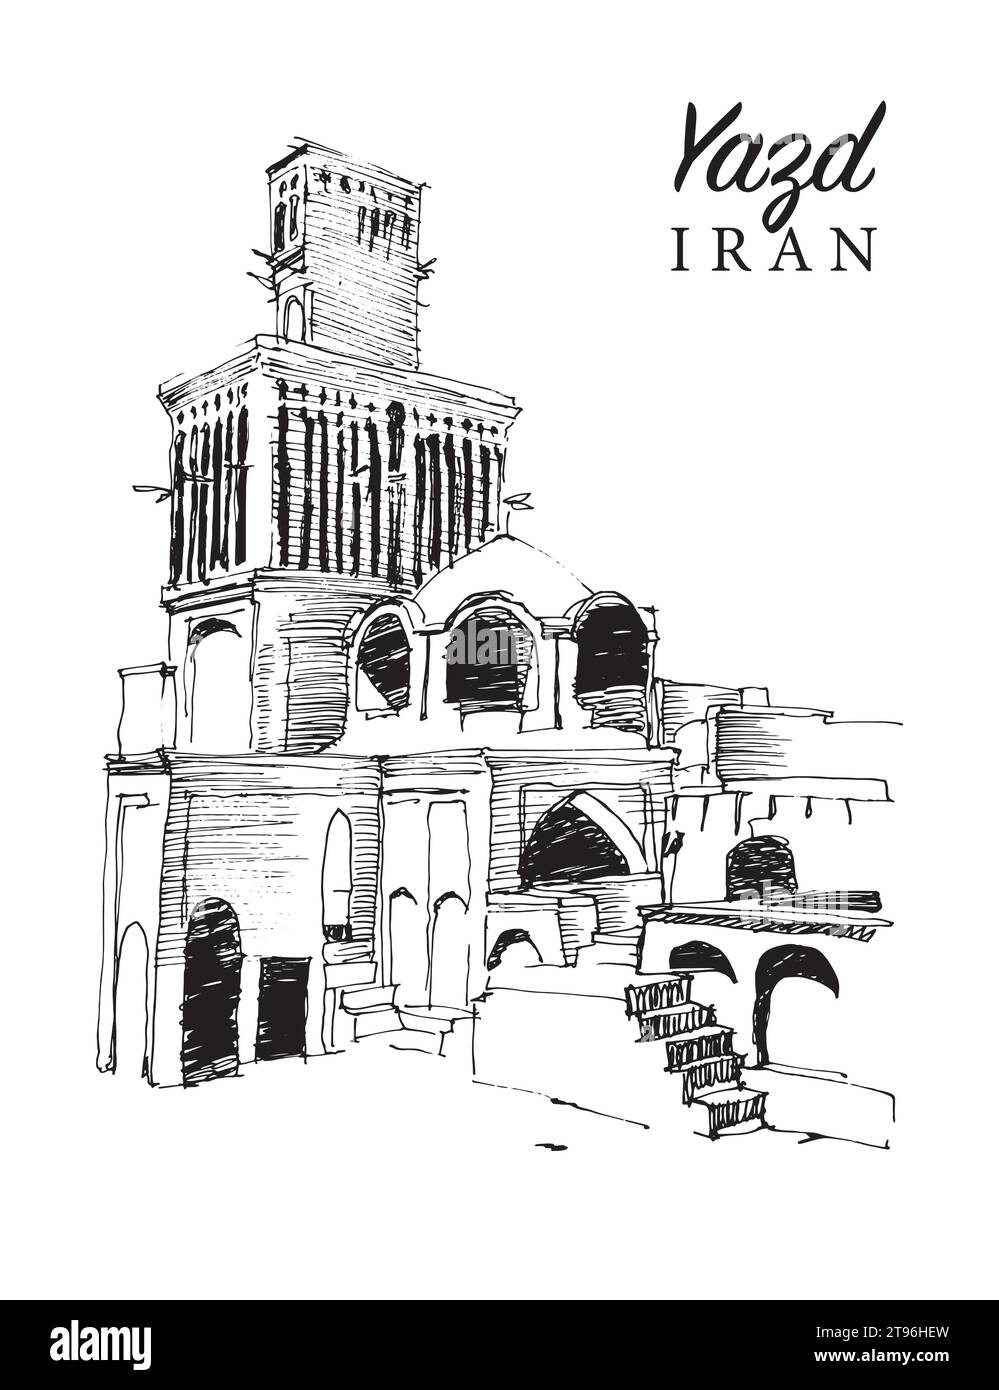 Vector hand drawn sketch illustration of Yazd city in Iran, famous for its windcatcher towers and unique architecture. Stock Vector